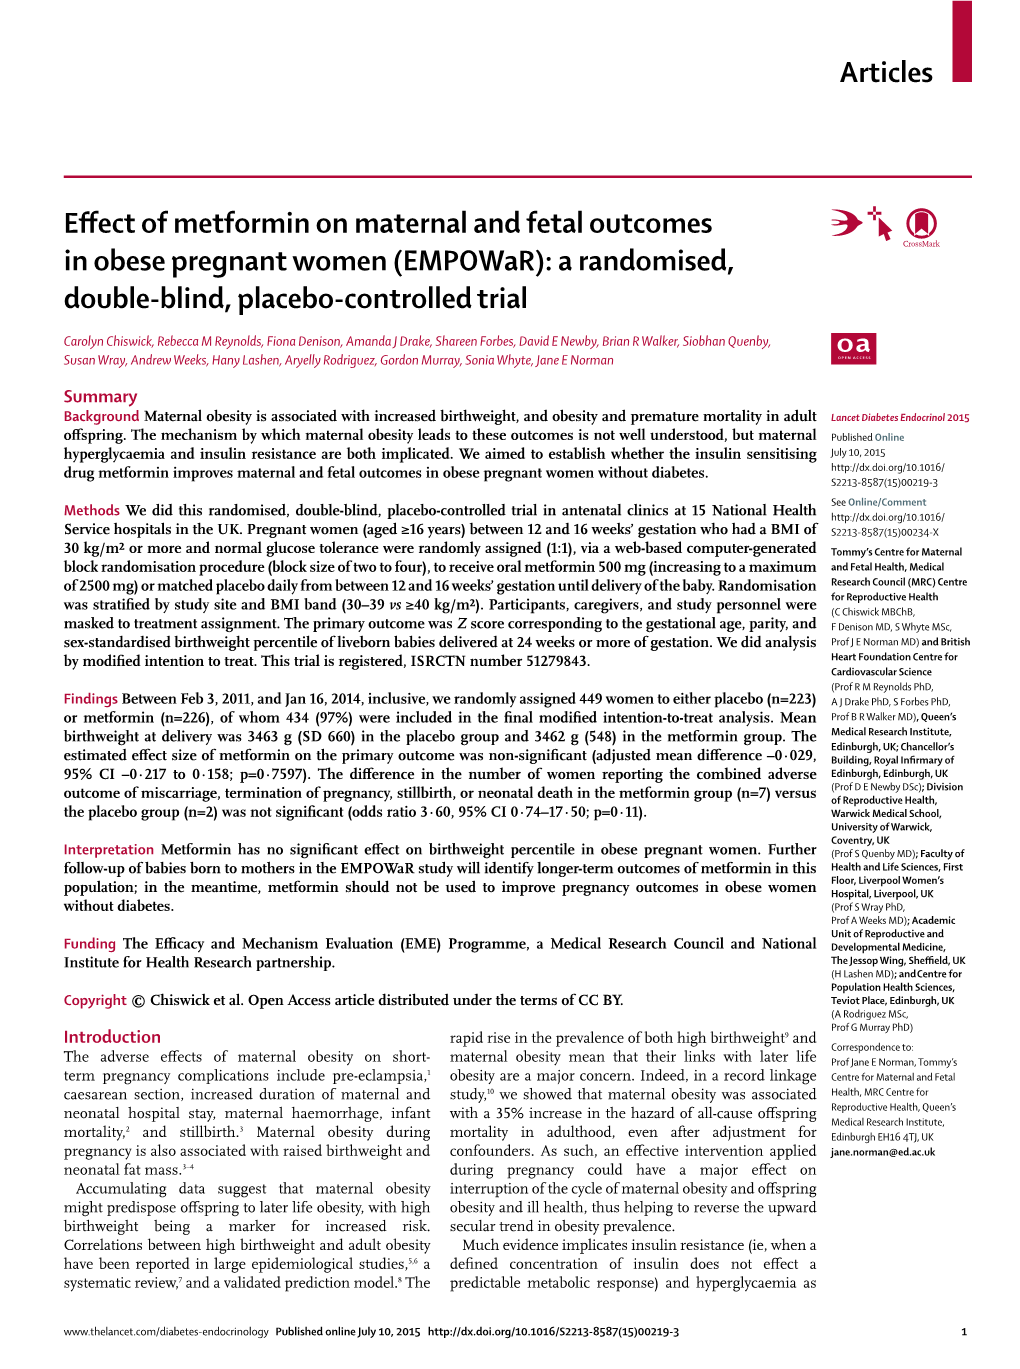 Effect of Metformin on Maternal and Fetal Outcomes in Obese